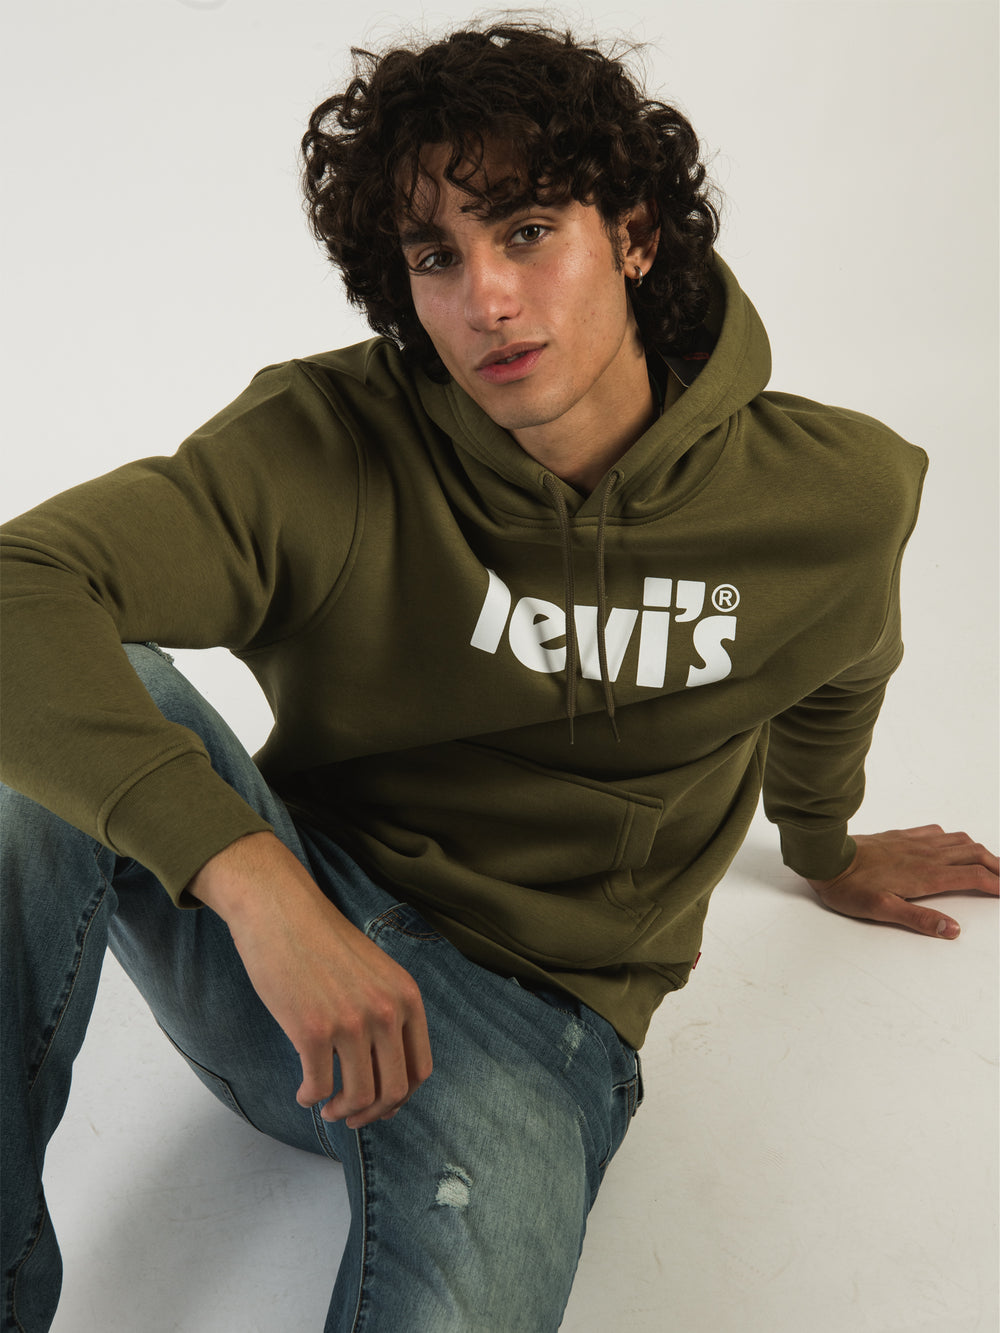 LEVIS RELAXED GRAPHIC HOODIE - CLEARANCE